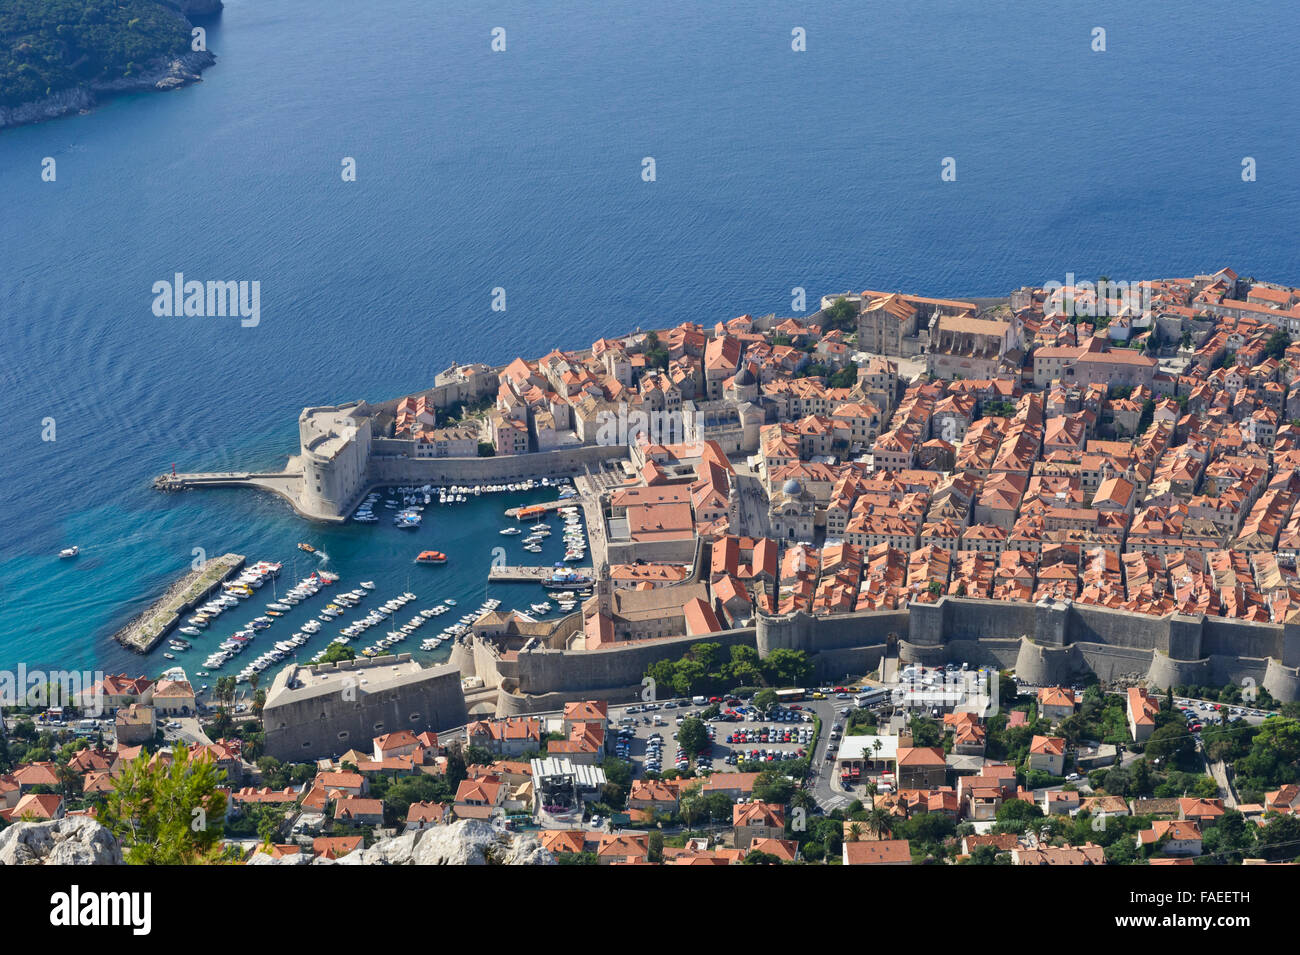 A panoramic view of the medieval town and harbour of Dubrovnik, Croatia. Stock Photo